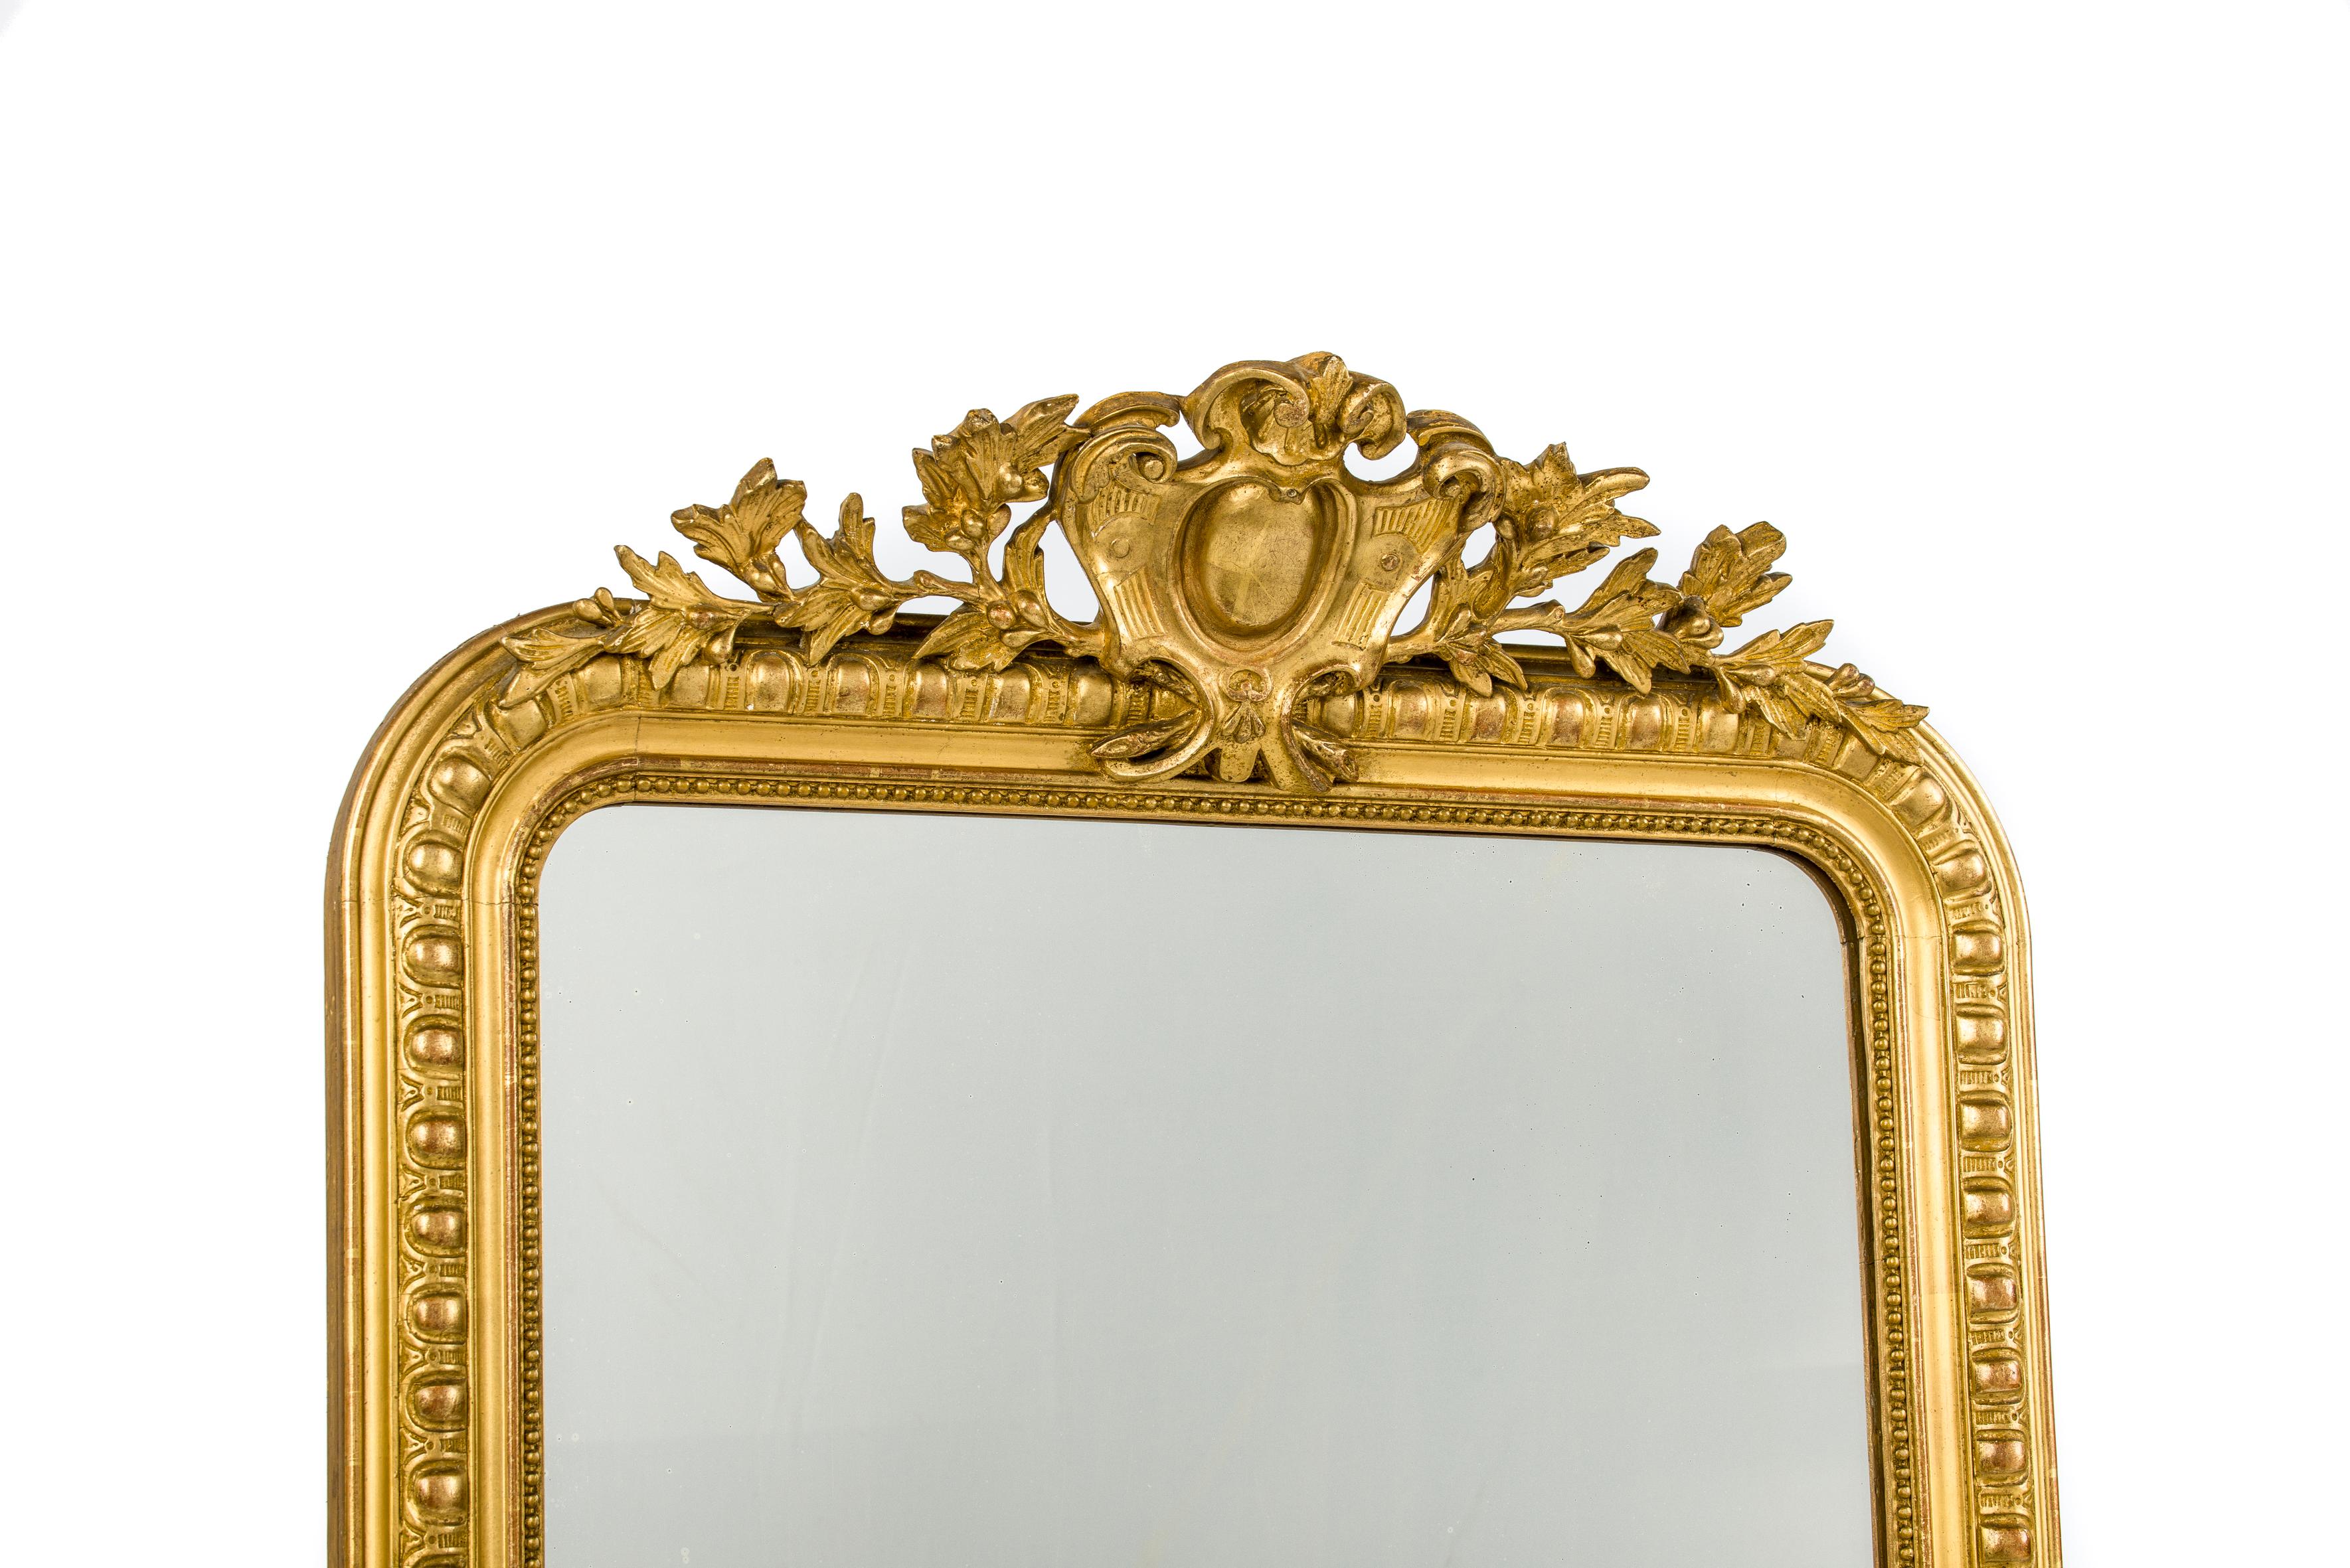 This beautiful antique mirror was made in Southern France in the mid 19th century. It has the upper rounded corners that are typical for Louis Philippe mirrors. The mirror frame has a detailed gadrooned profile and a classic pearl beading surrounds